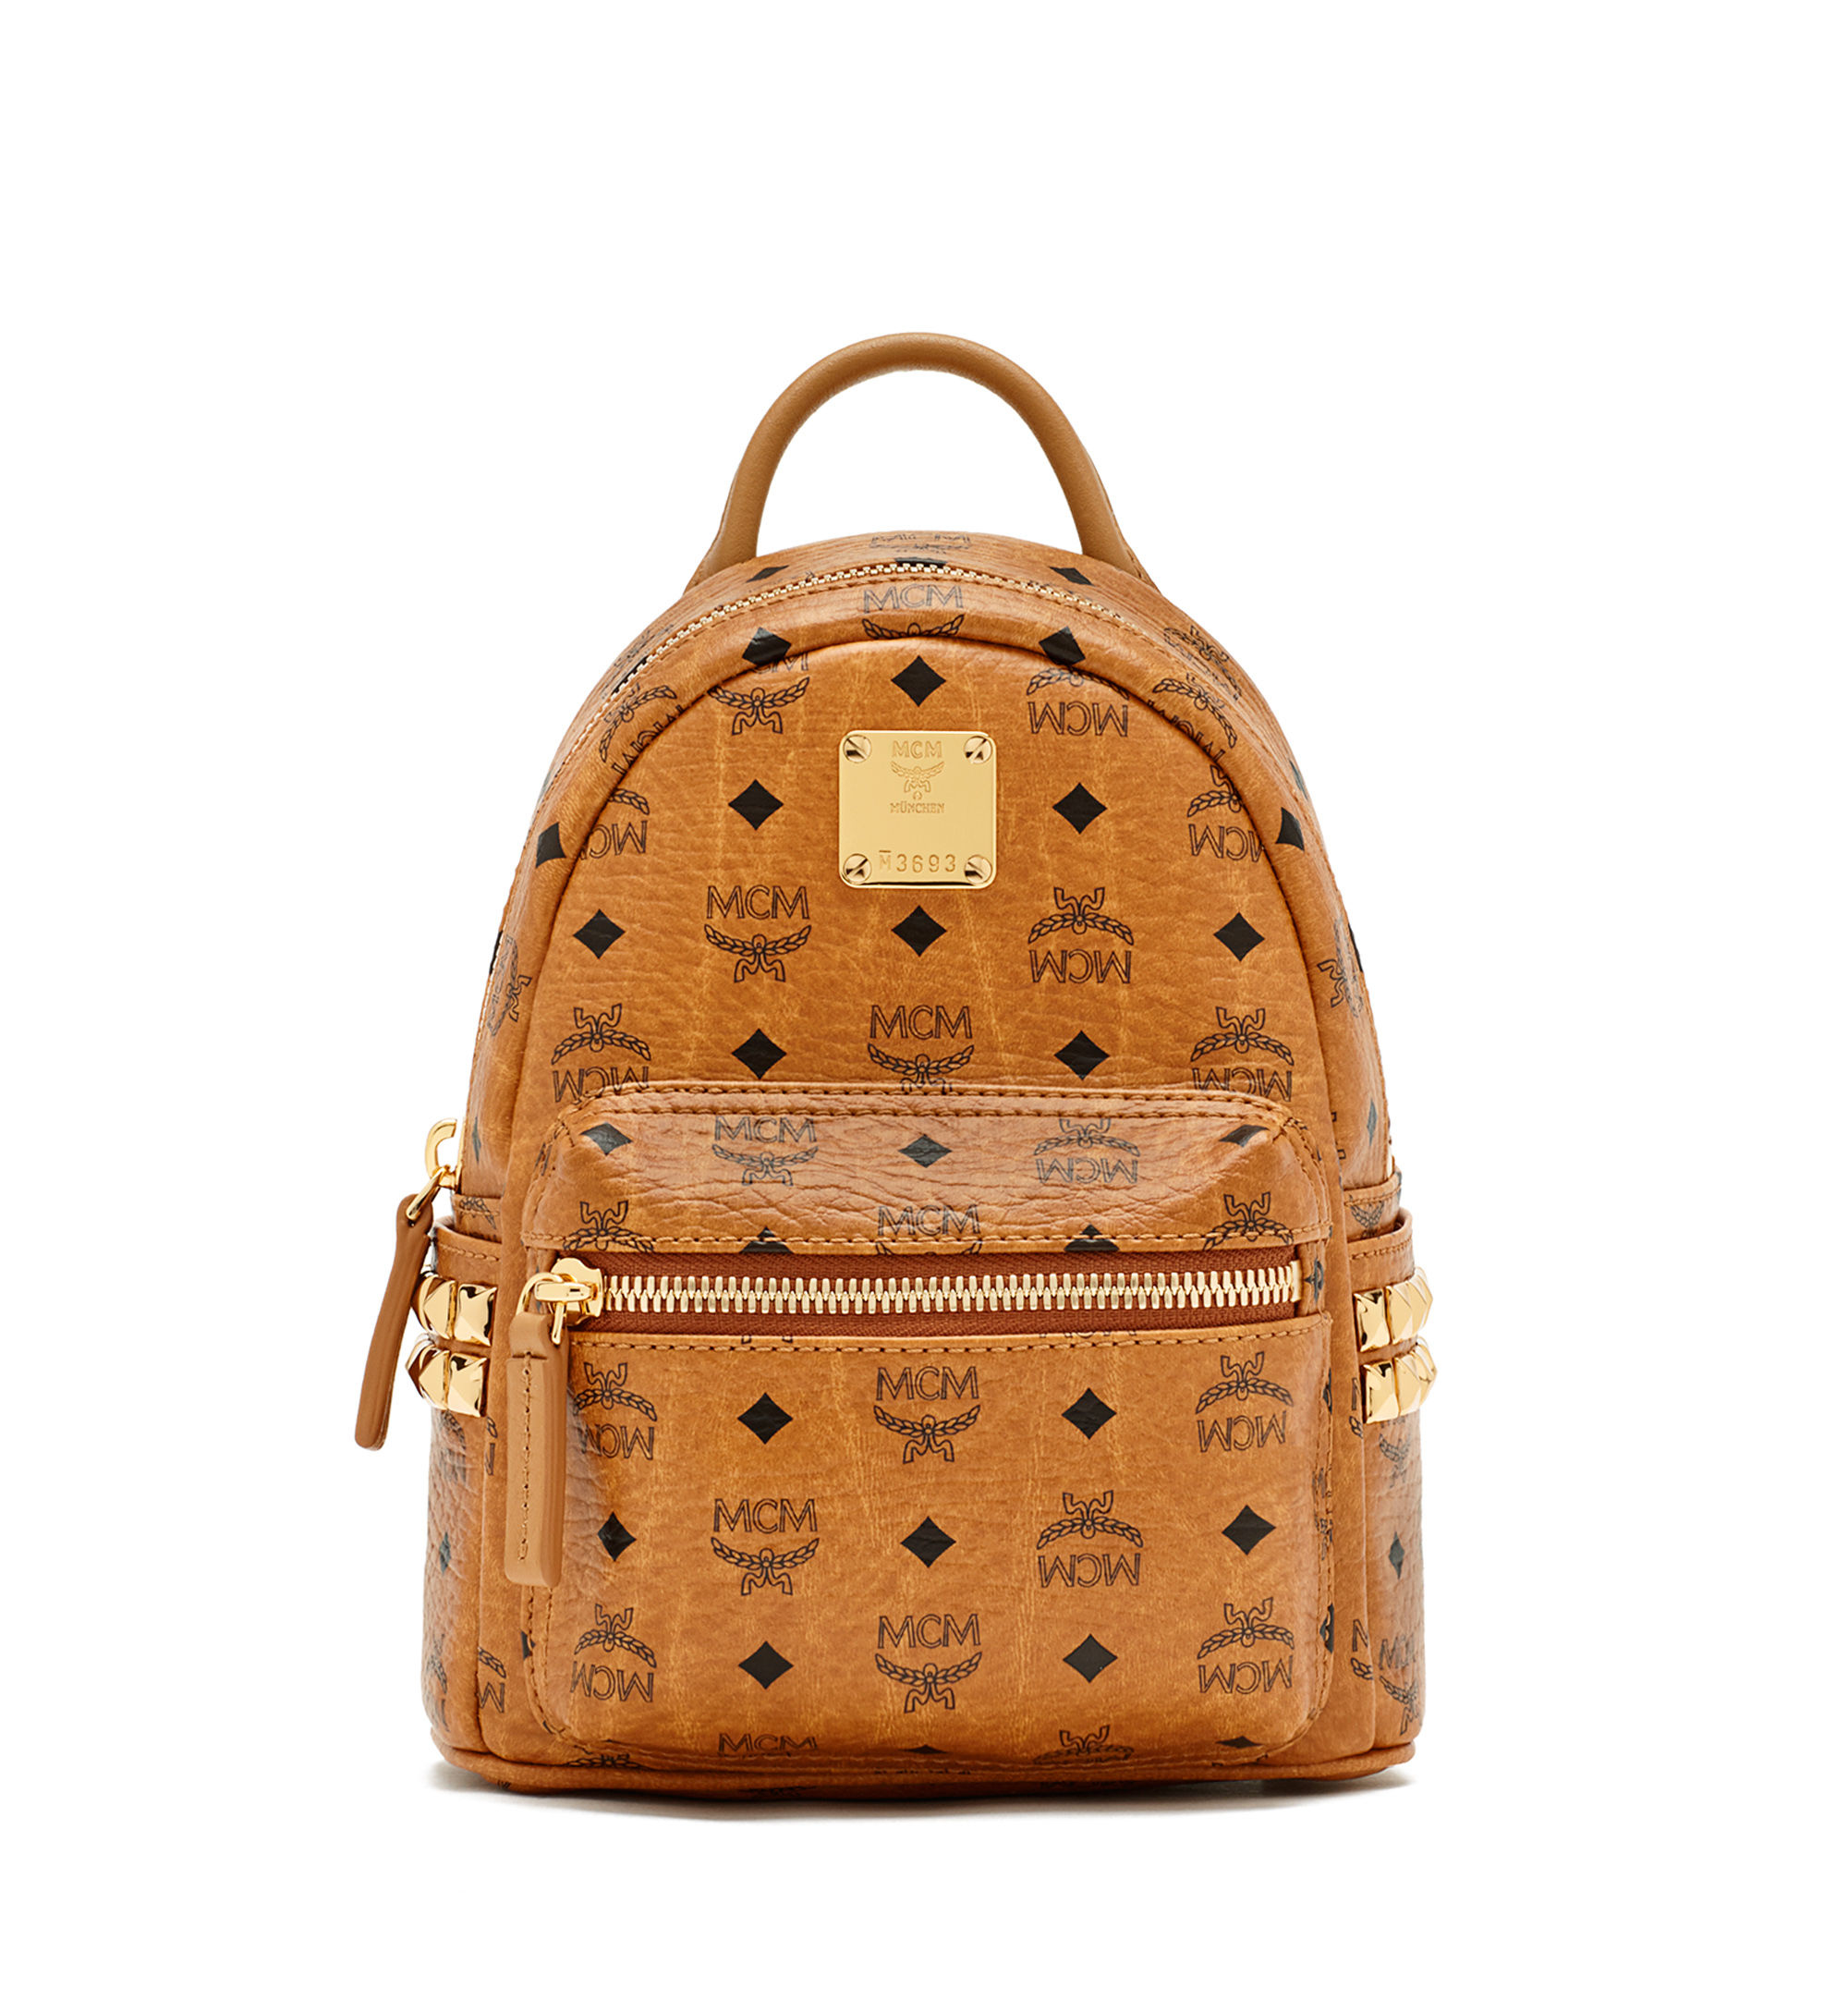 Lyst - Mcm Medium Front Studs Stark Backpack in Natural